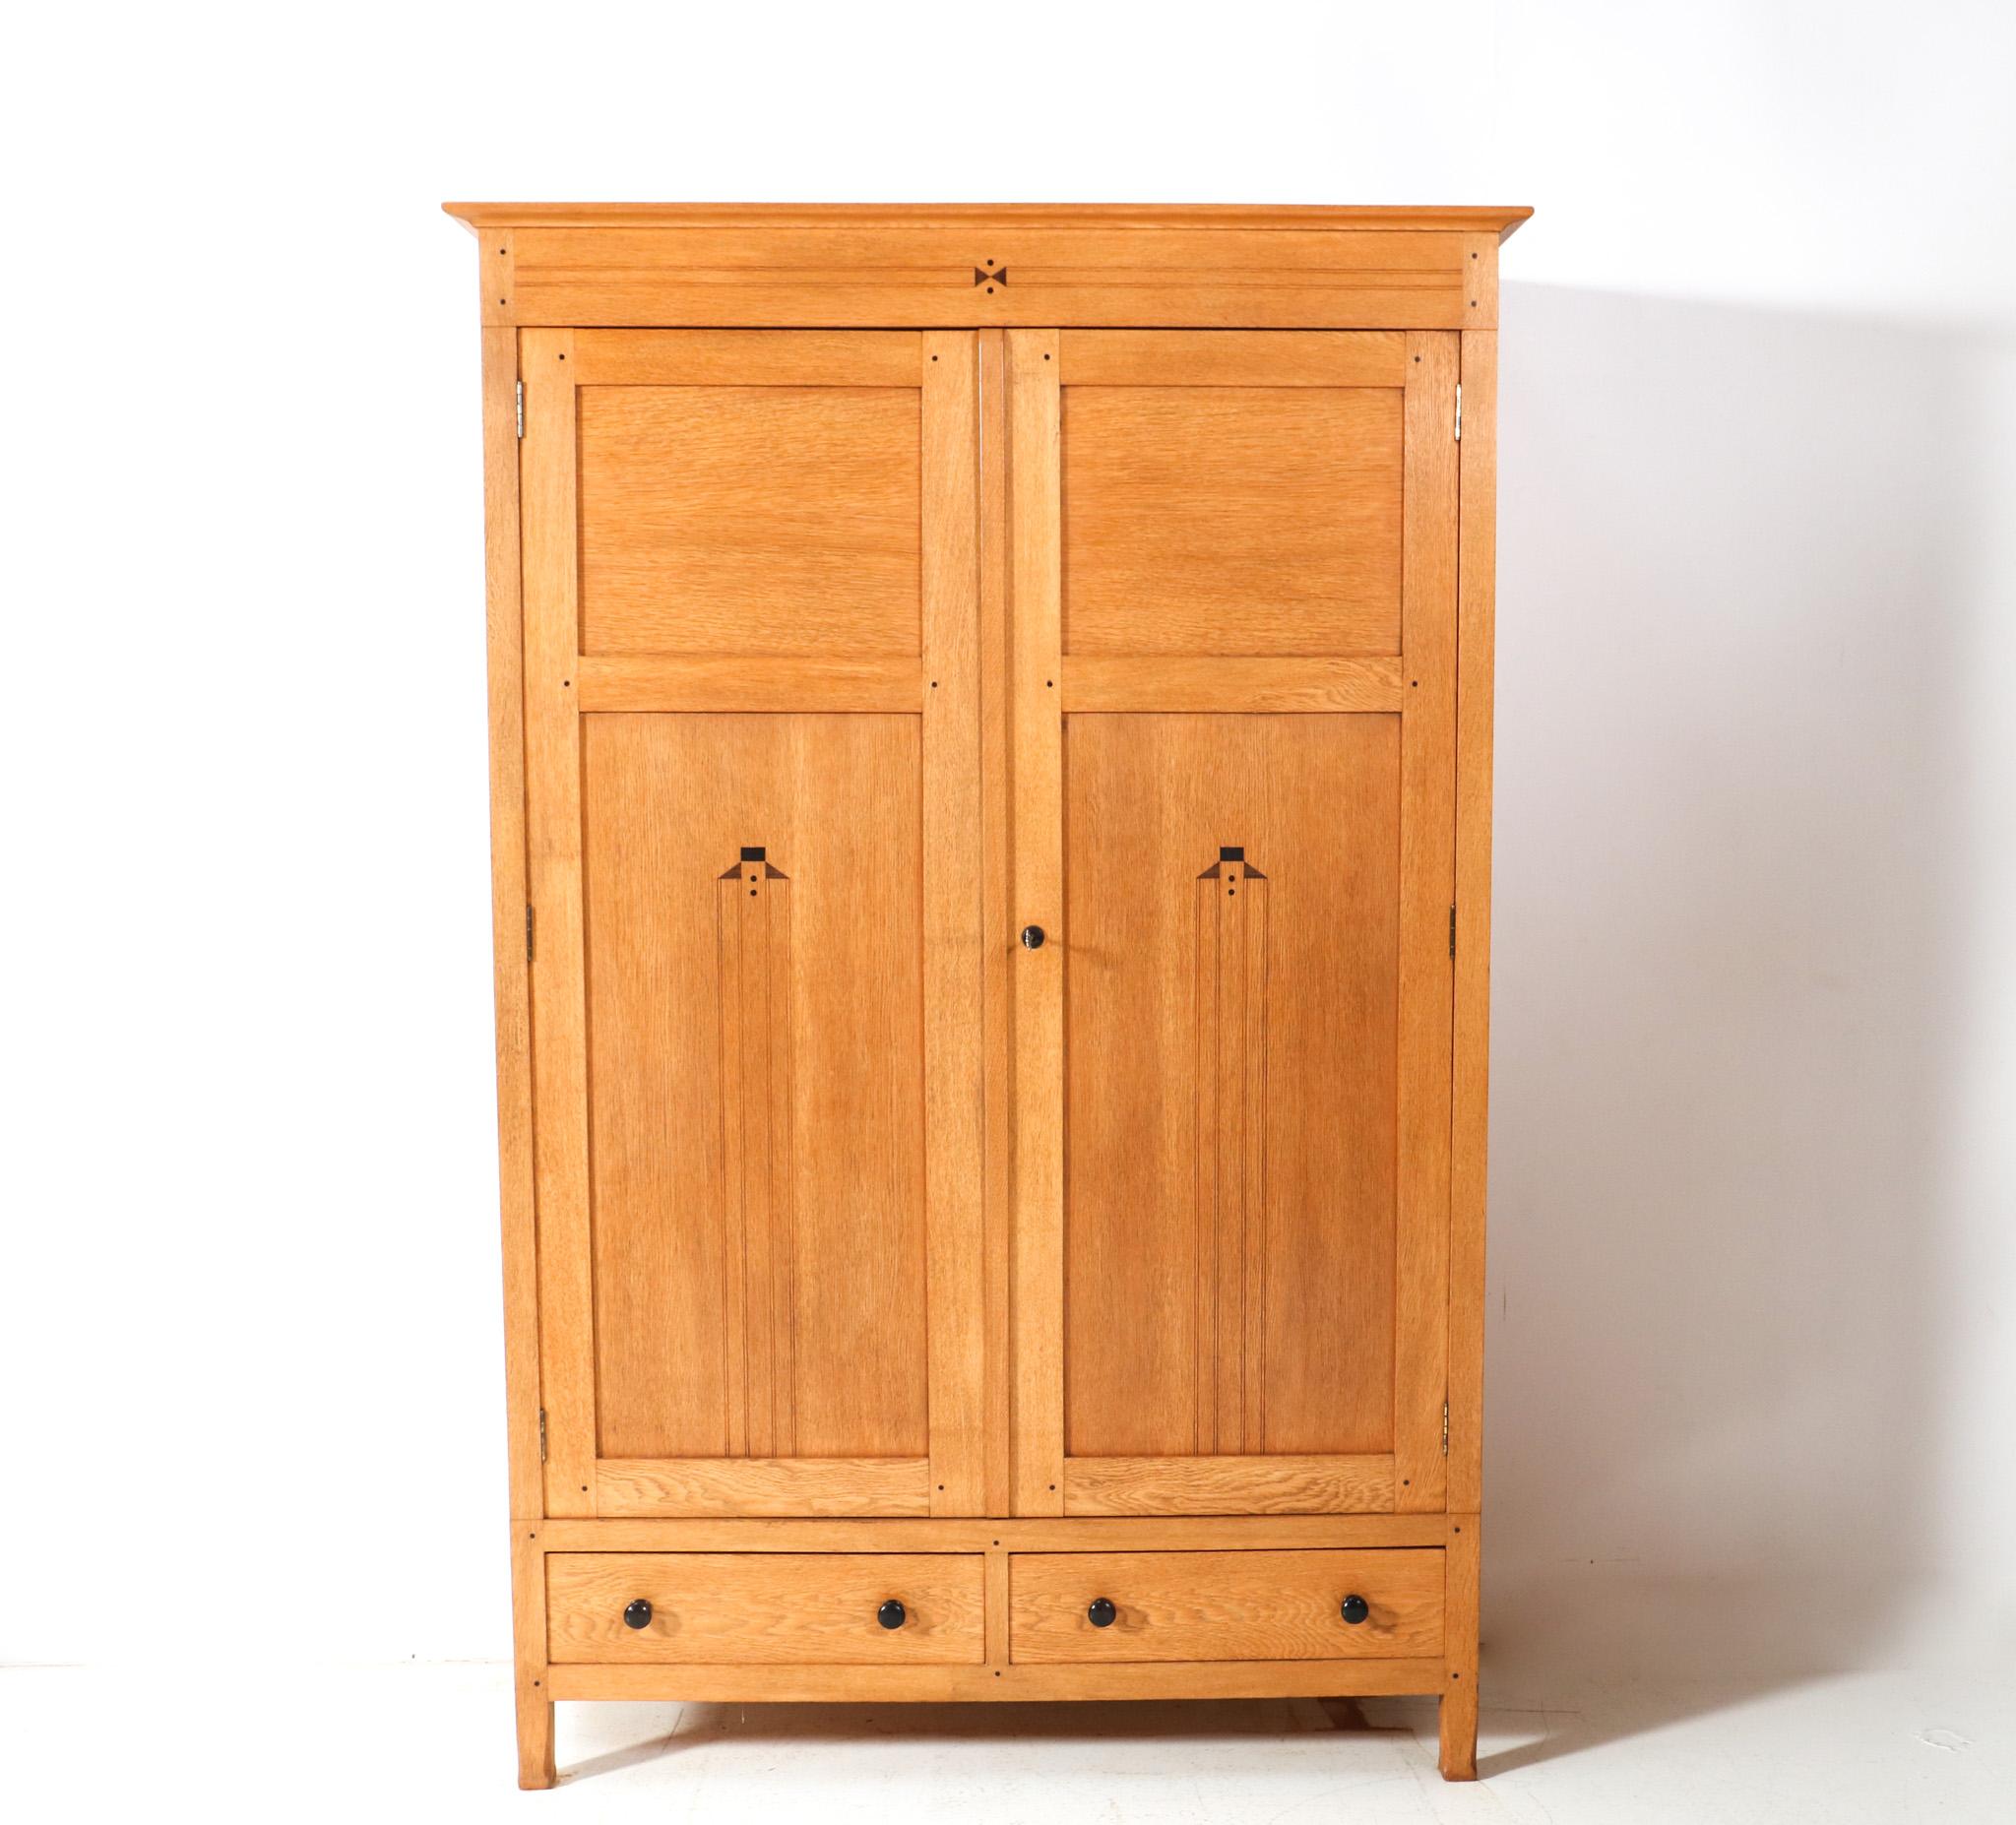 Magnificent and ultra rare Arts & Crafts Art Nouveau armoire or wardrobe.
Design by Jac. van den Bosch.
Striking Dutch design from the 1900s.
Solid oak base with original solid ebony knobs and original ebony decorative elements.
Four original wooden